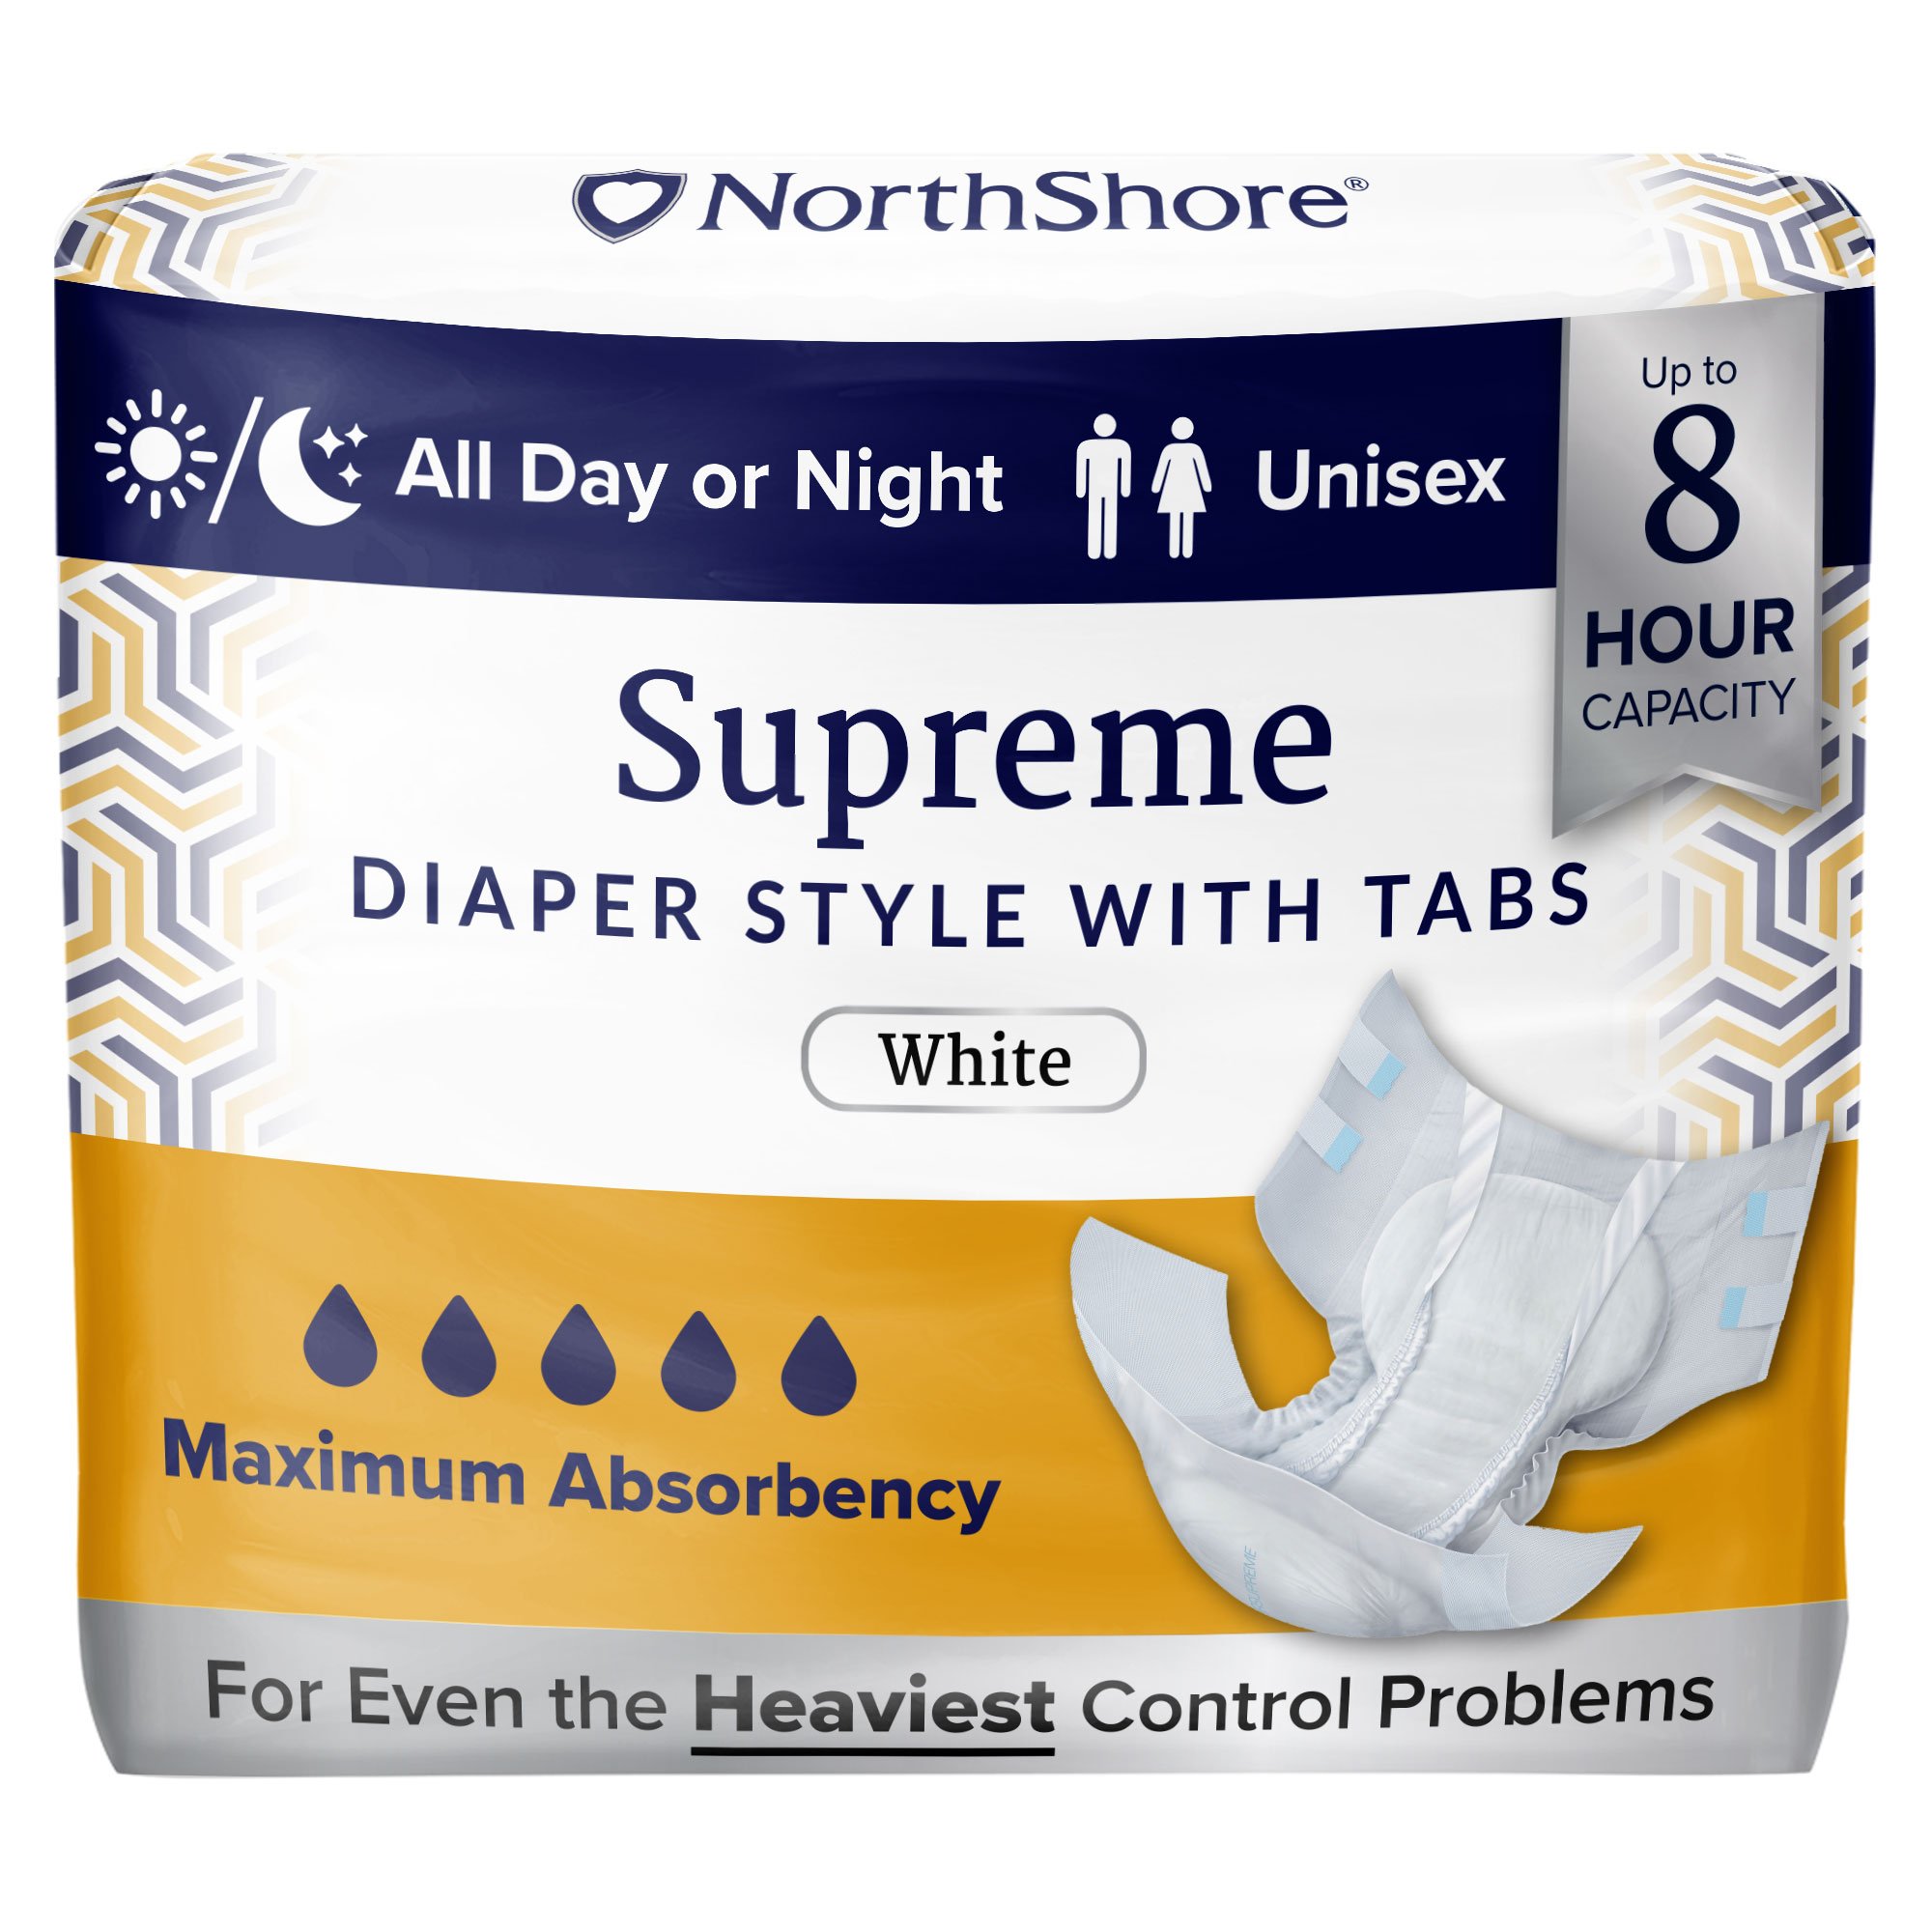 Supreme abdl diapers in white, blue, green and purple